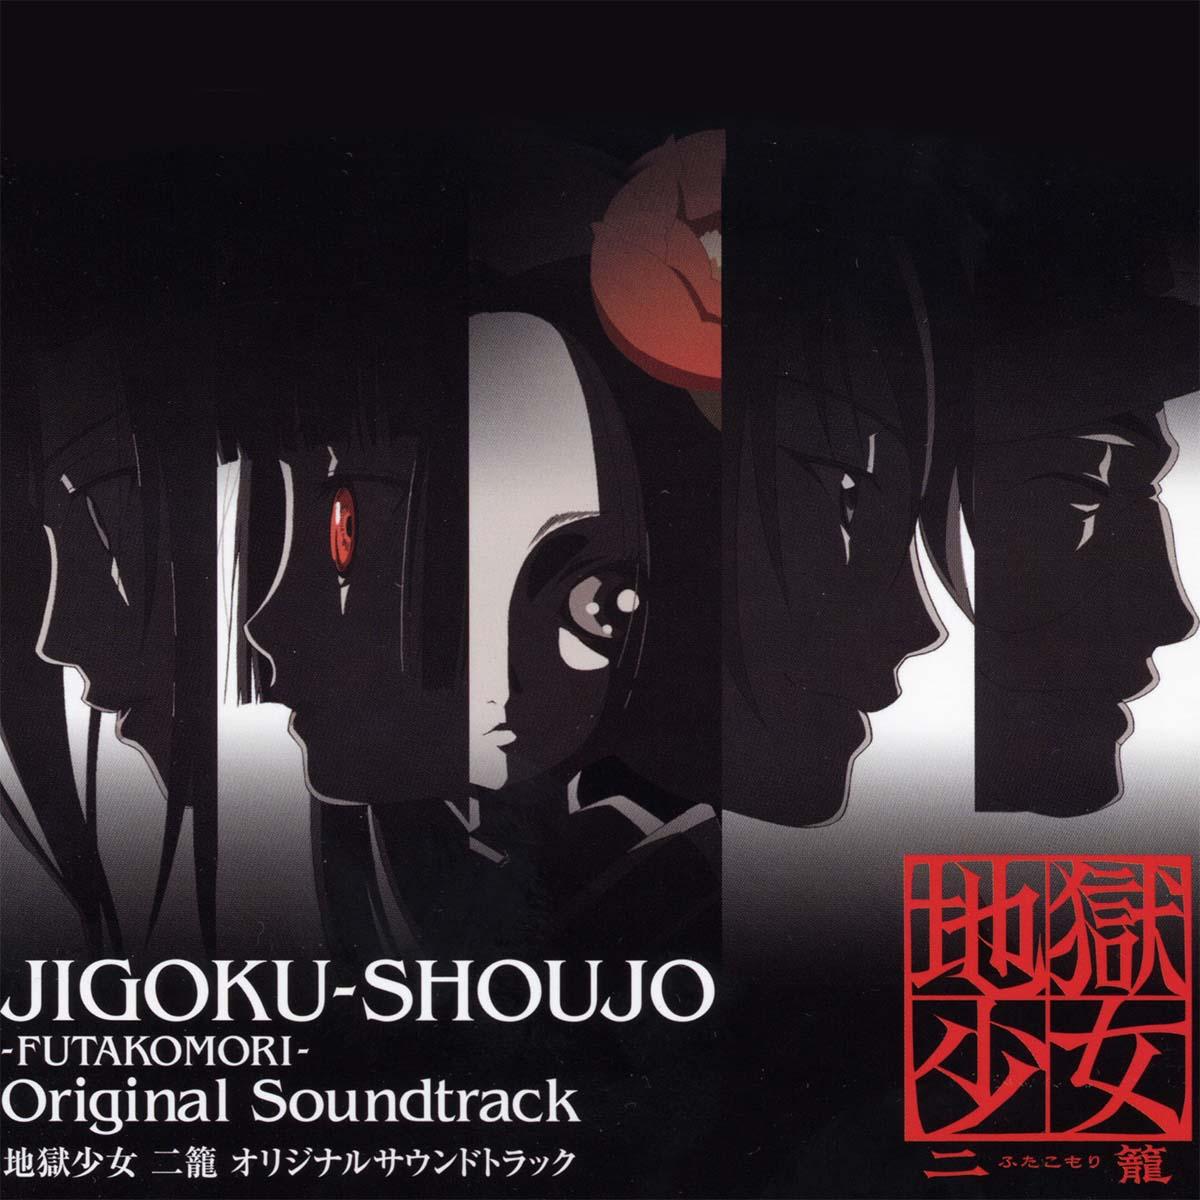 Hell Girl: Two Mirrors Original Soundtrack